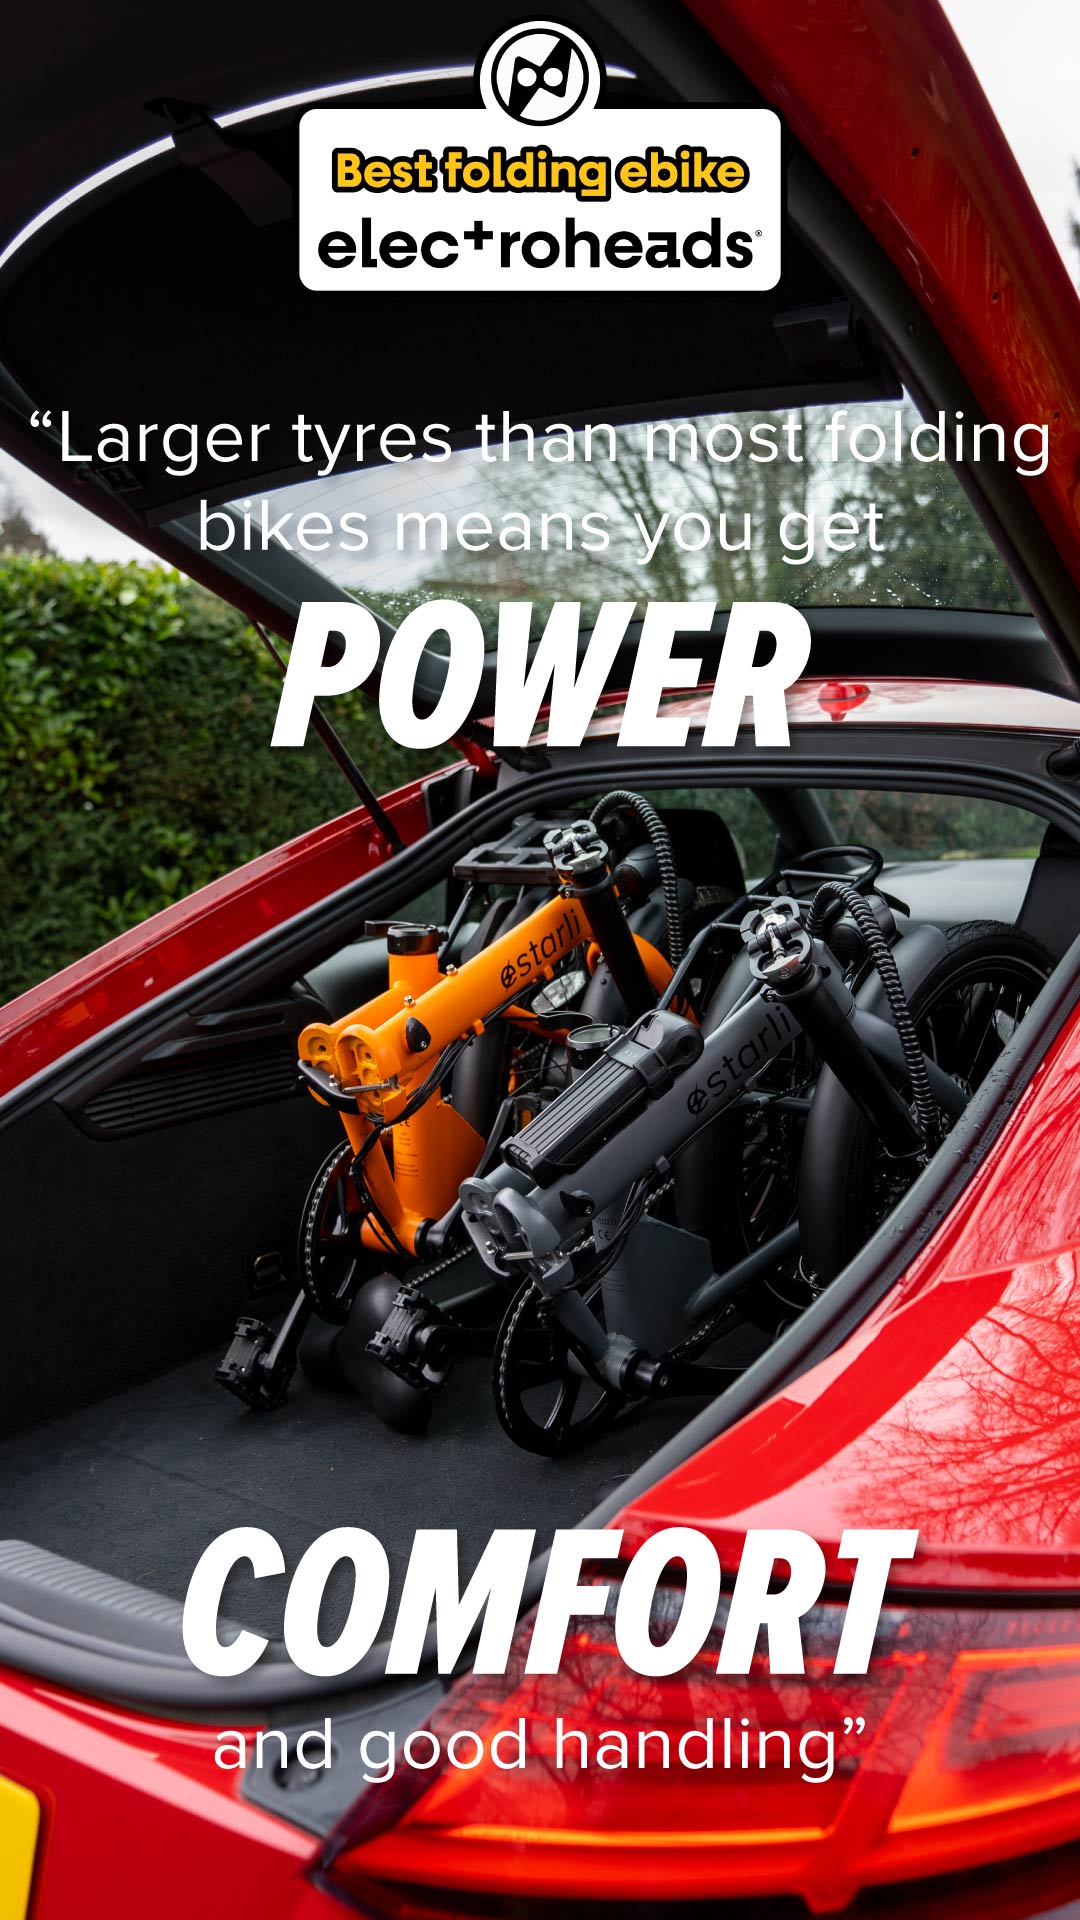 'The best folding ebike' according to Electroheads. In their words, "larger tyres than most folding bikes means you get power, comfort and good handling".